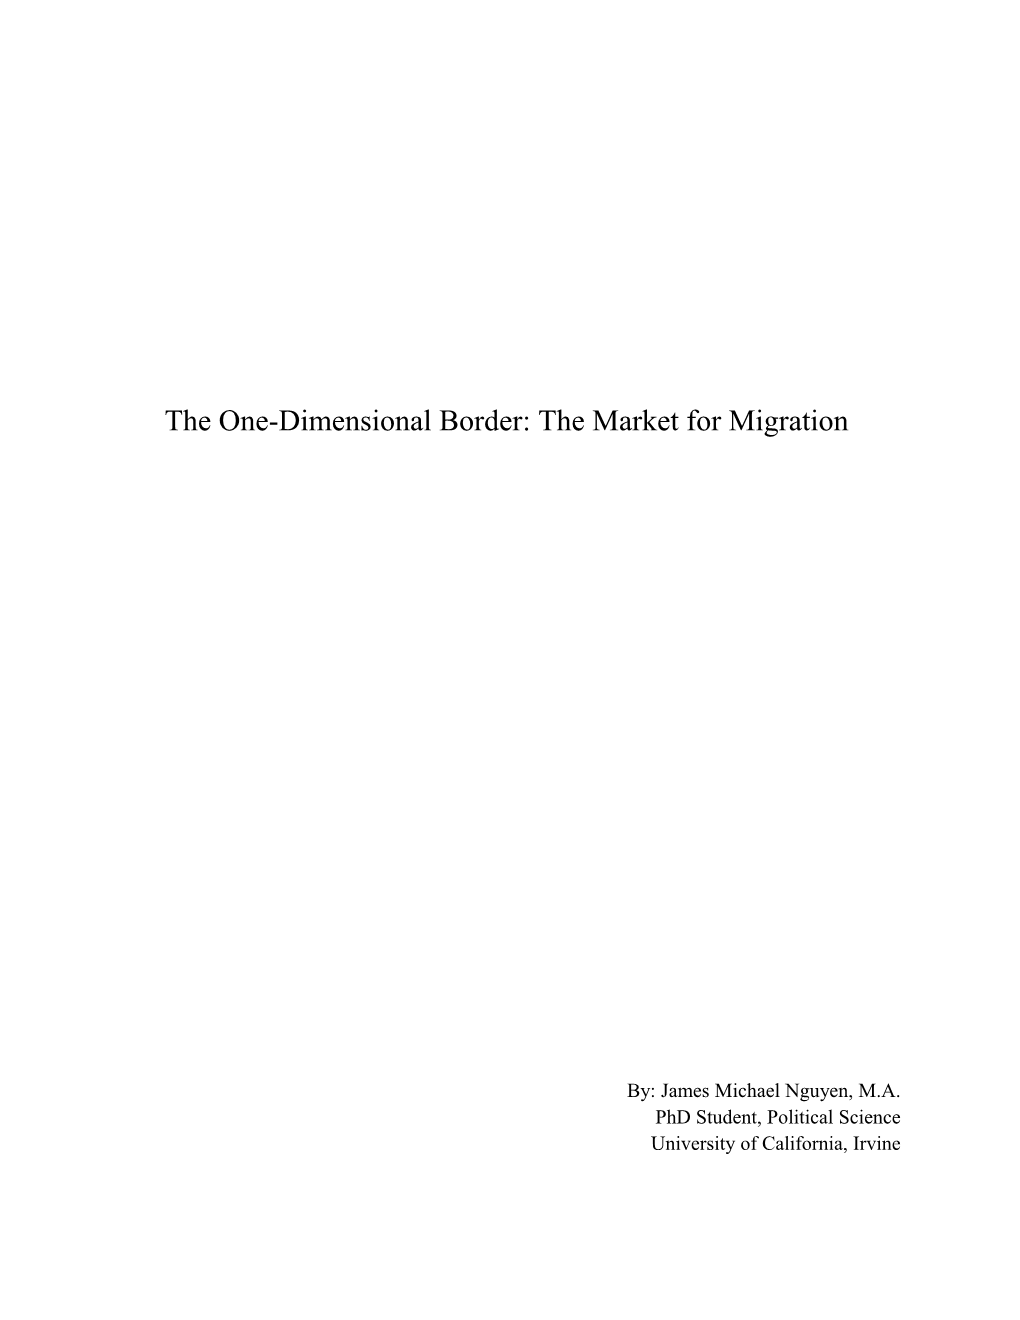 The One-Dimensional Border: the Market for Migration